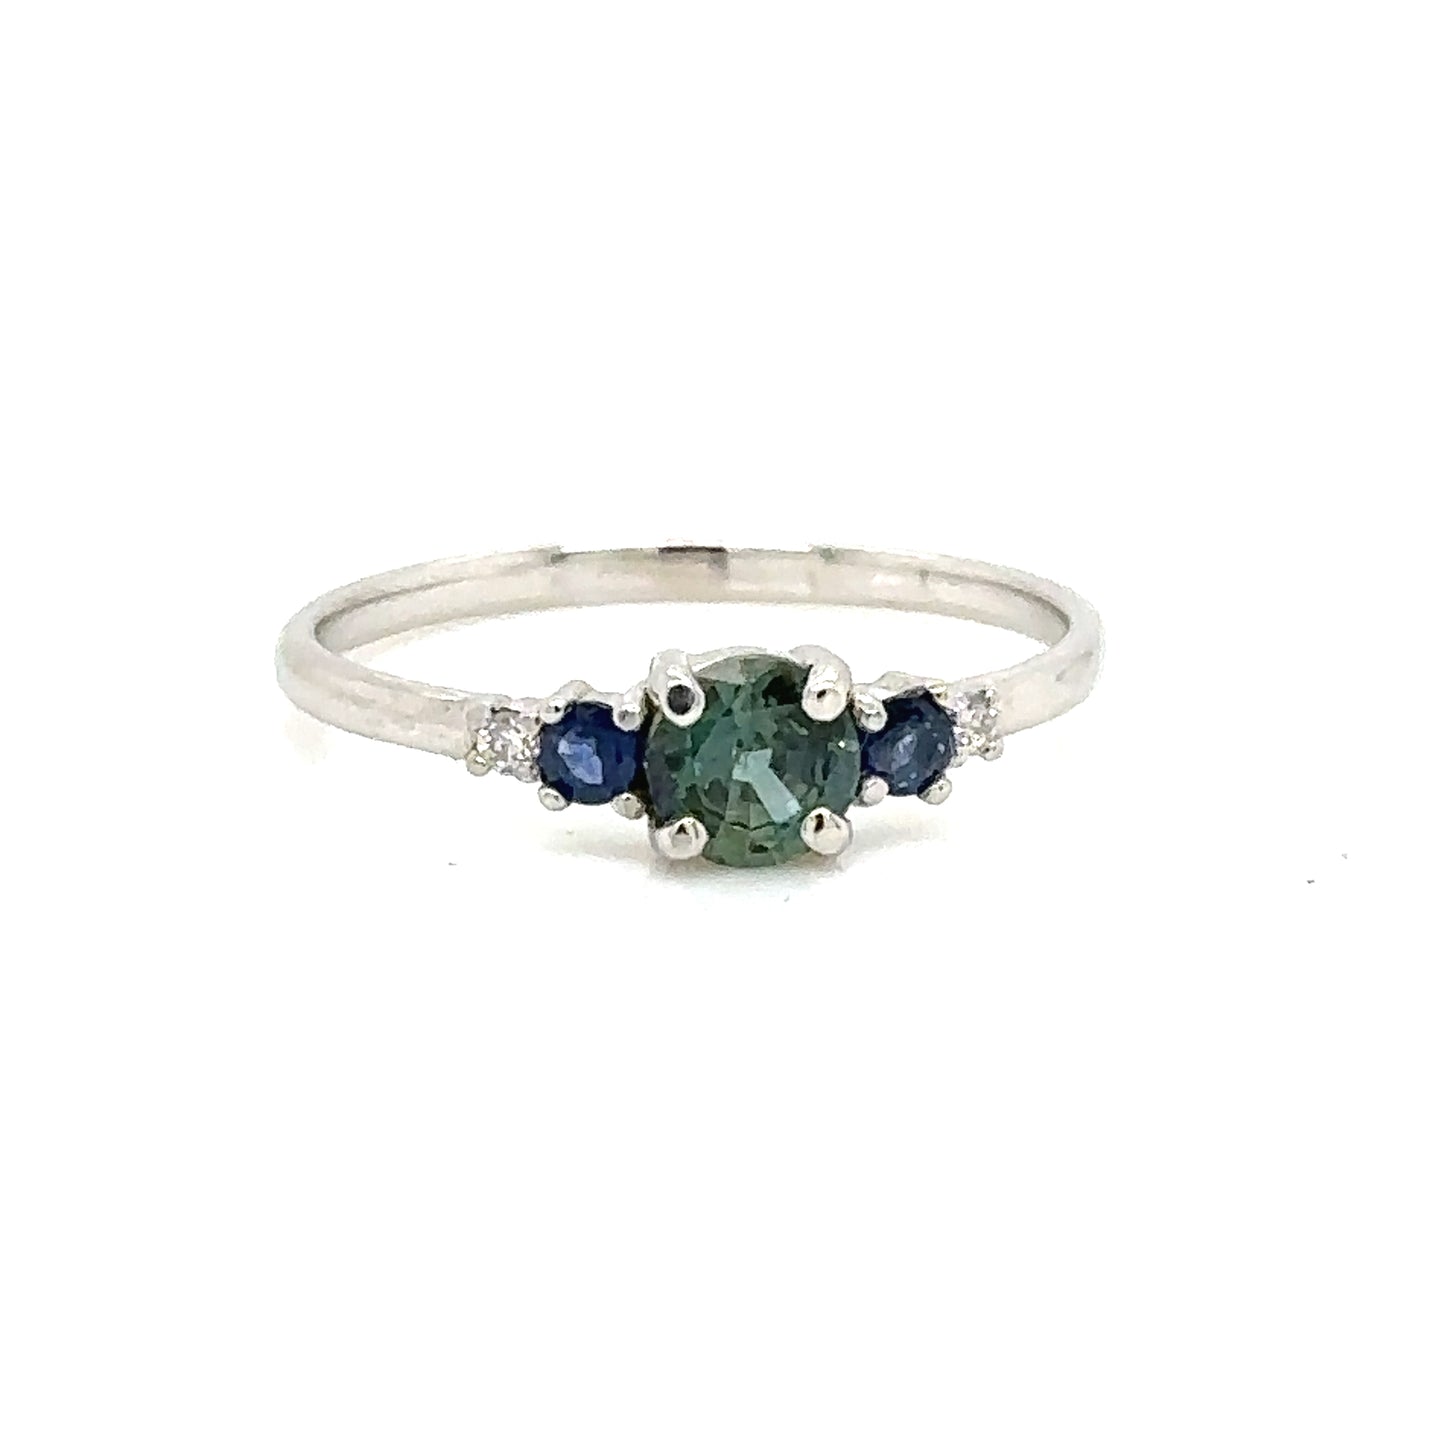 IMMEDIATE DELIVERY / Teal Sapphire Ring, with blue sapphire and diamonds / 14k white gold / size 5.5